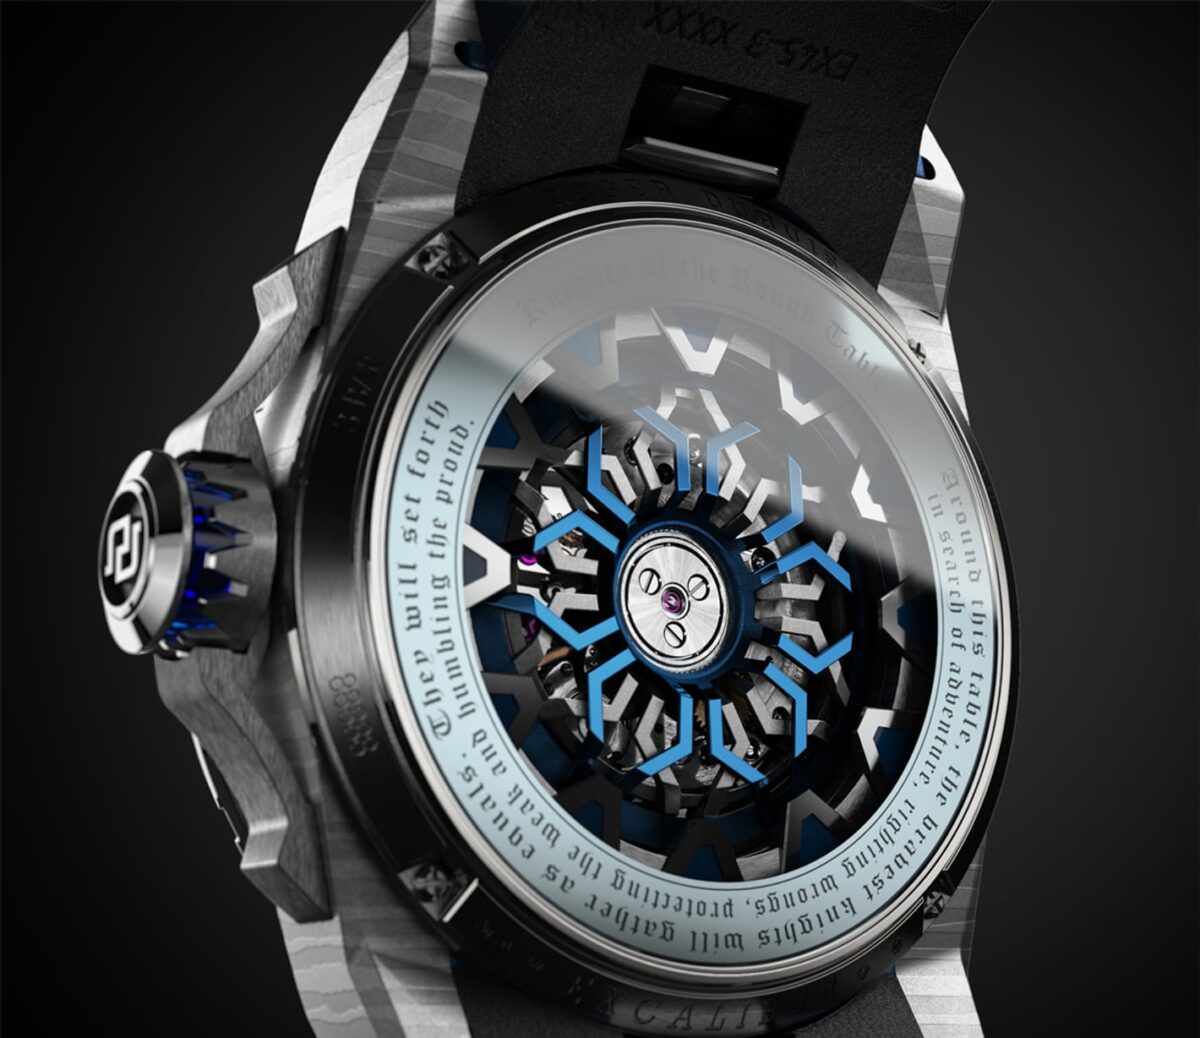 ad57e9f549a62f2f8ab60ec 1 Knights of the Round Table watch "Fire and Ice"